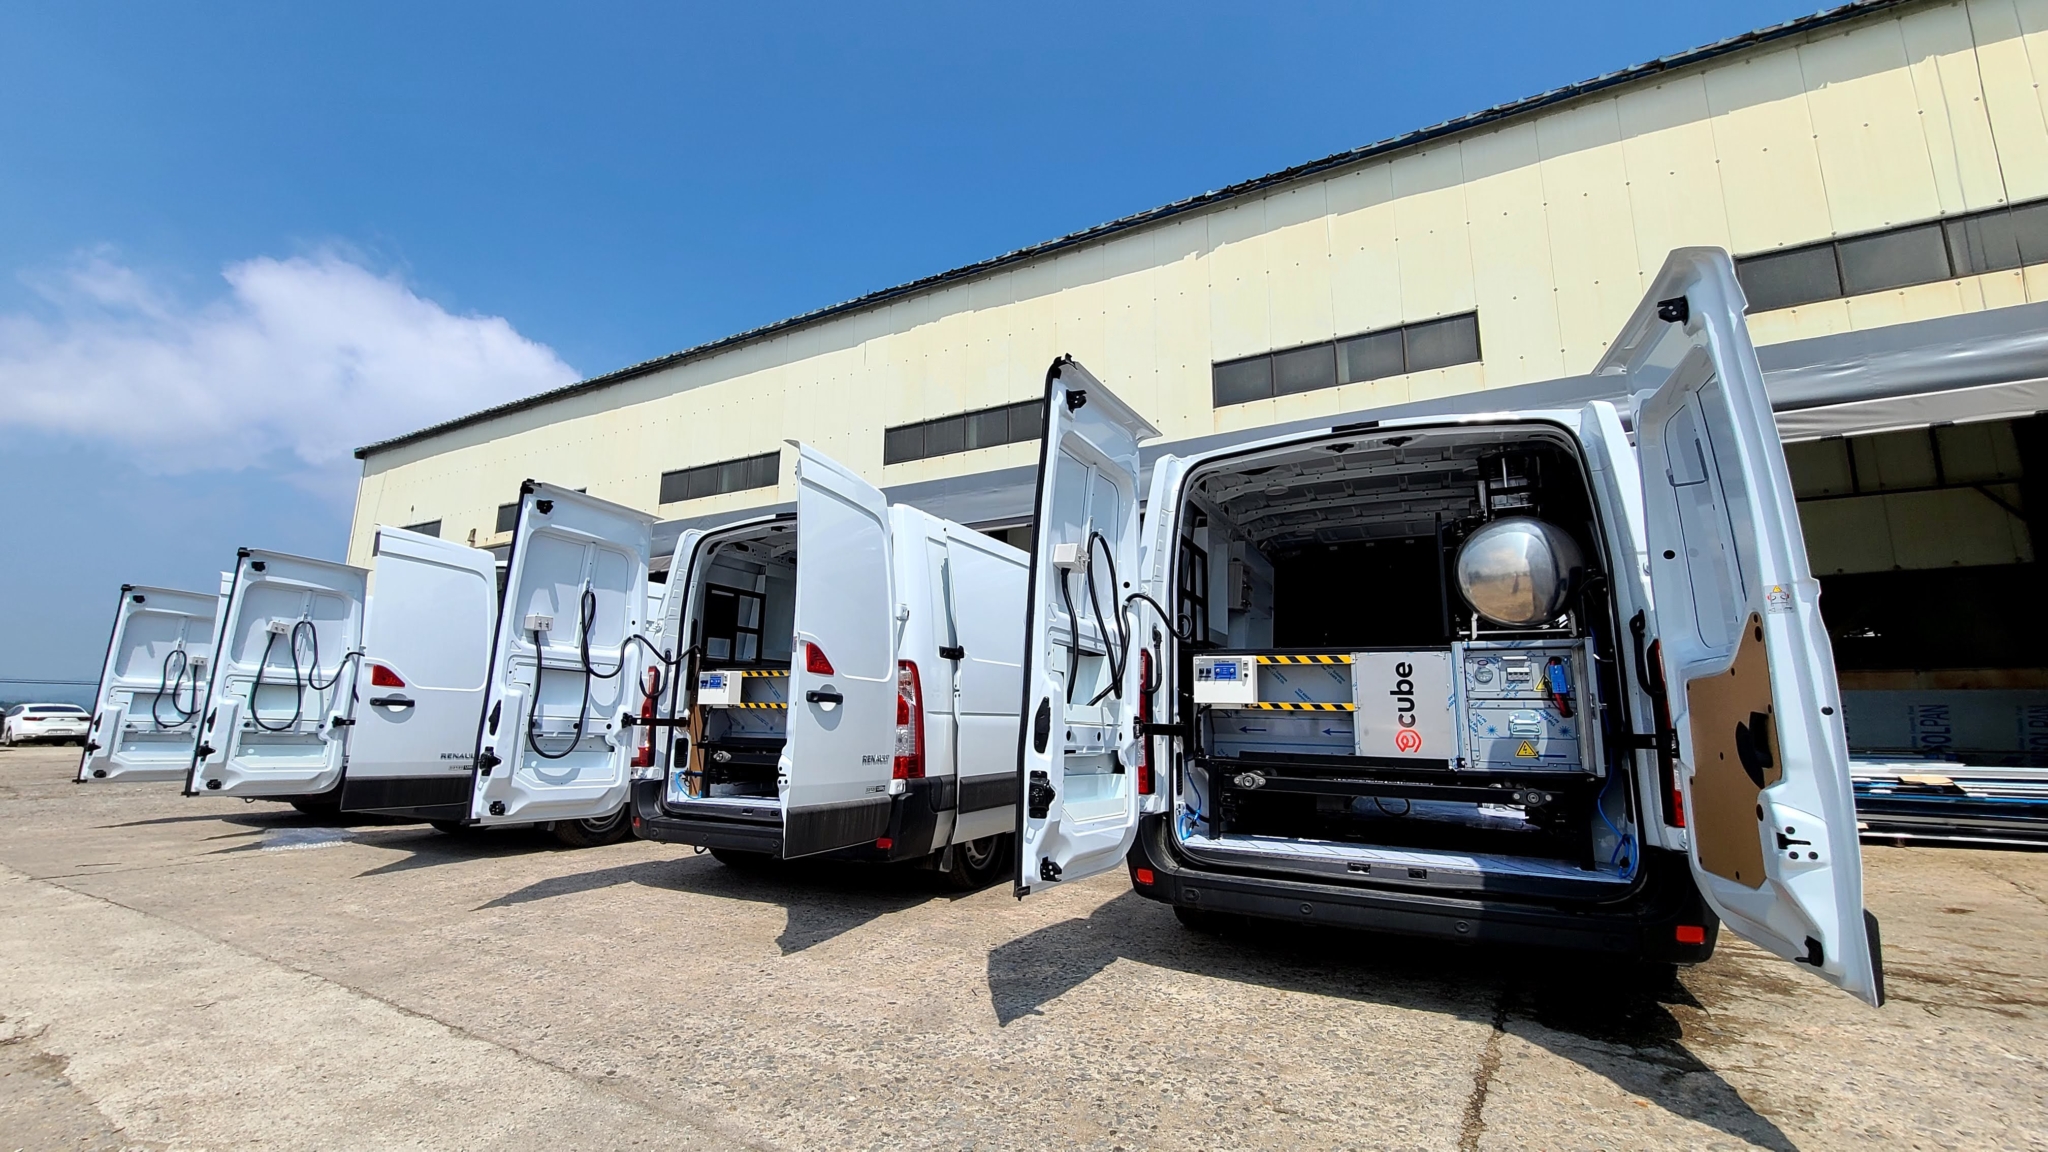 E-CUBE’s 4th generation mobile service unit helps TMG extend global reach